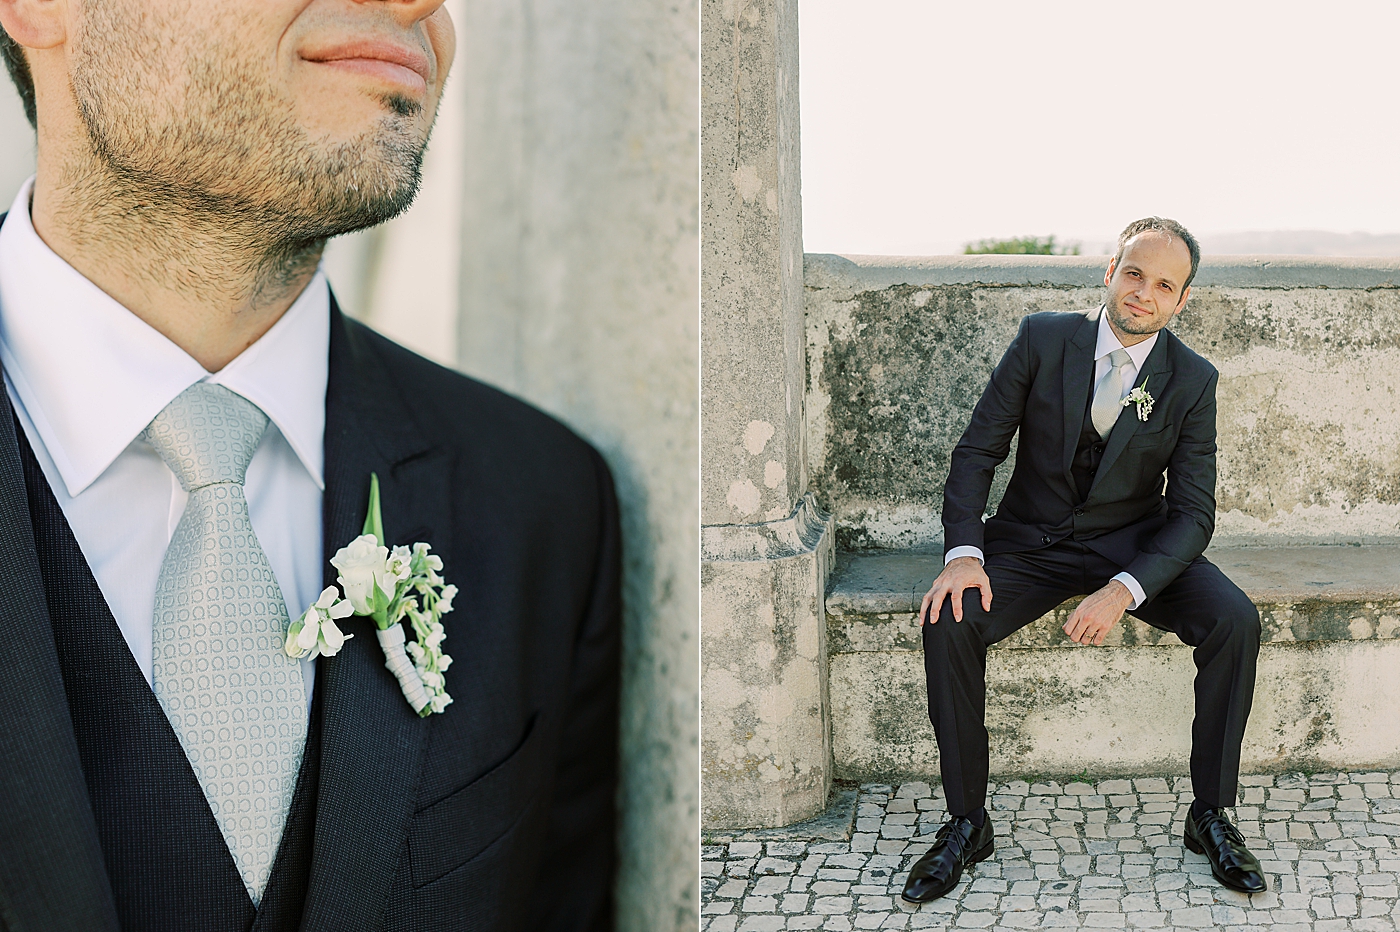 Grooms details and flowers | Image by Diane Sotero Photography